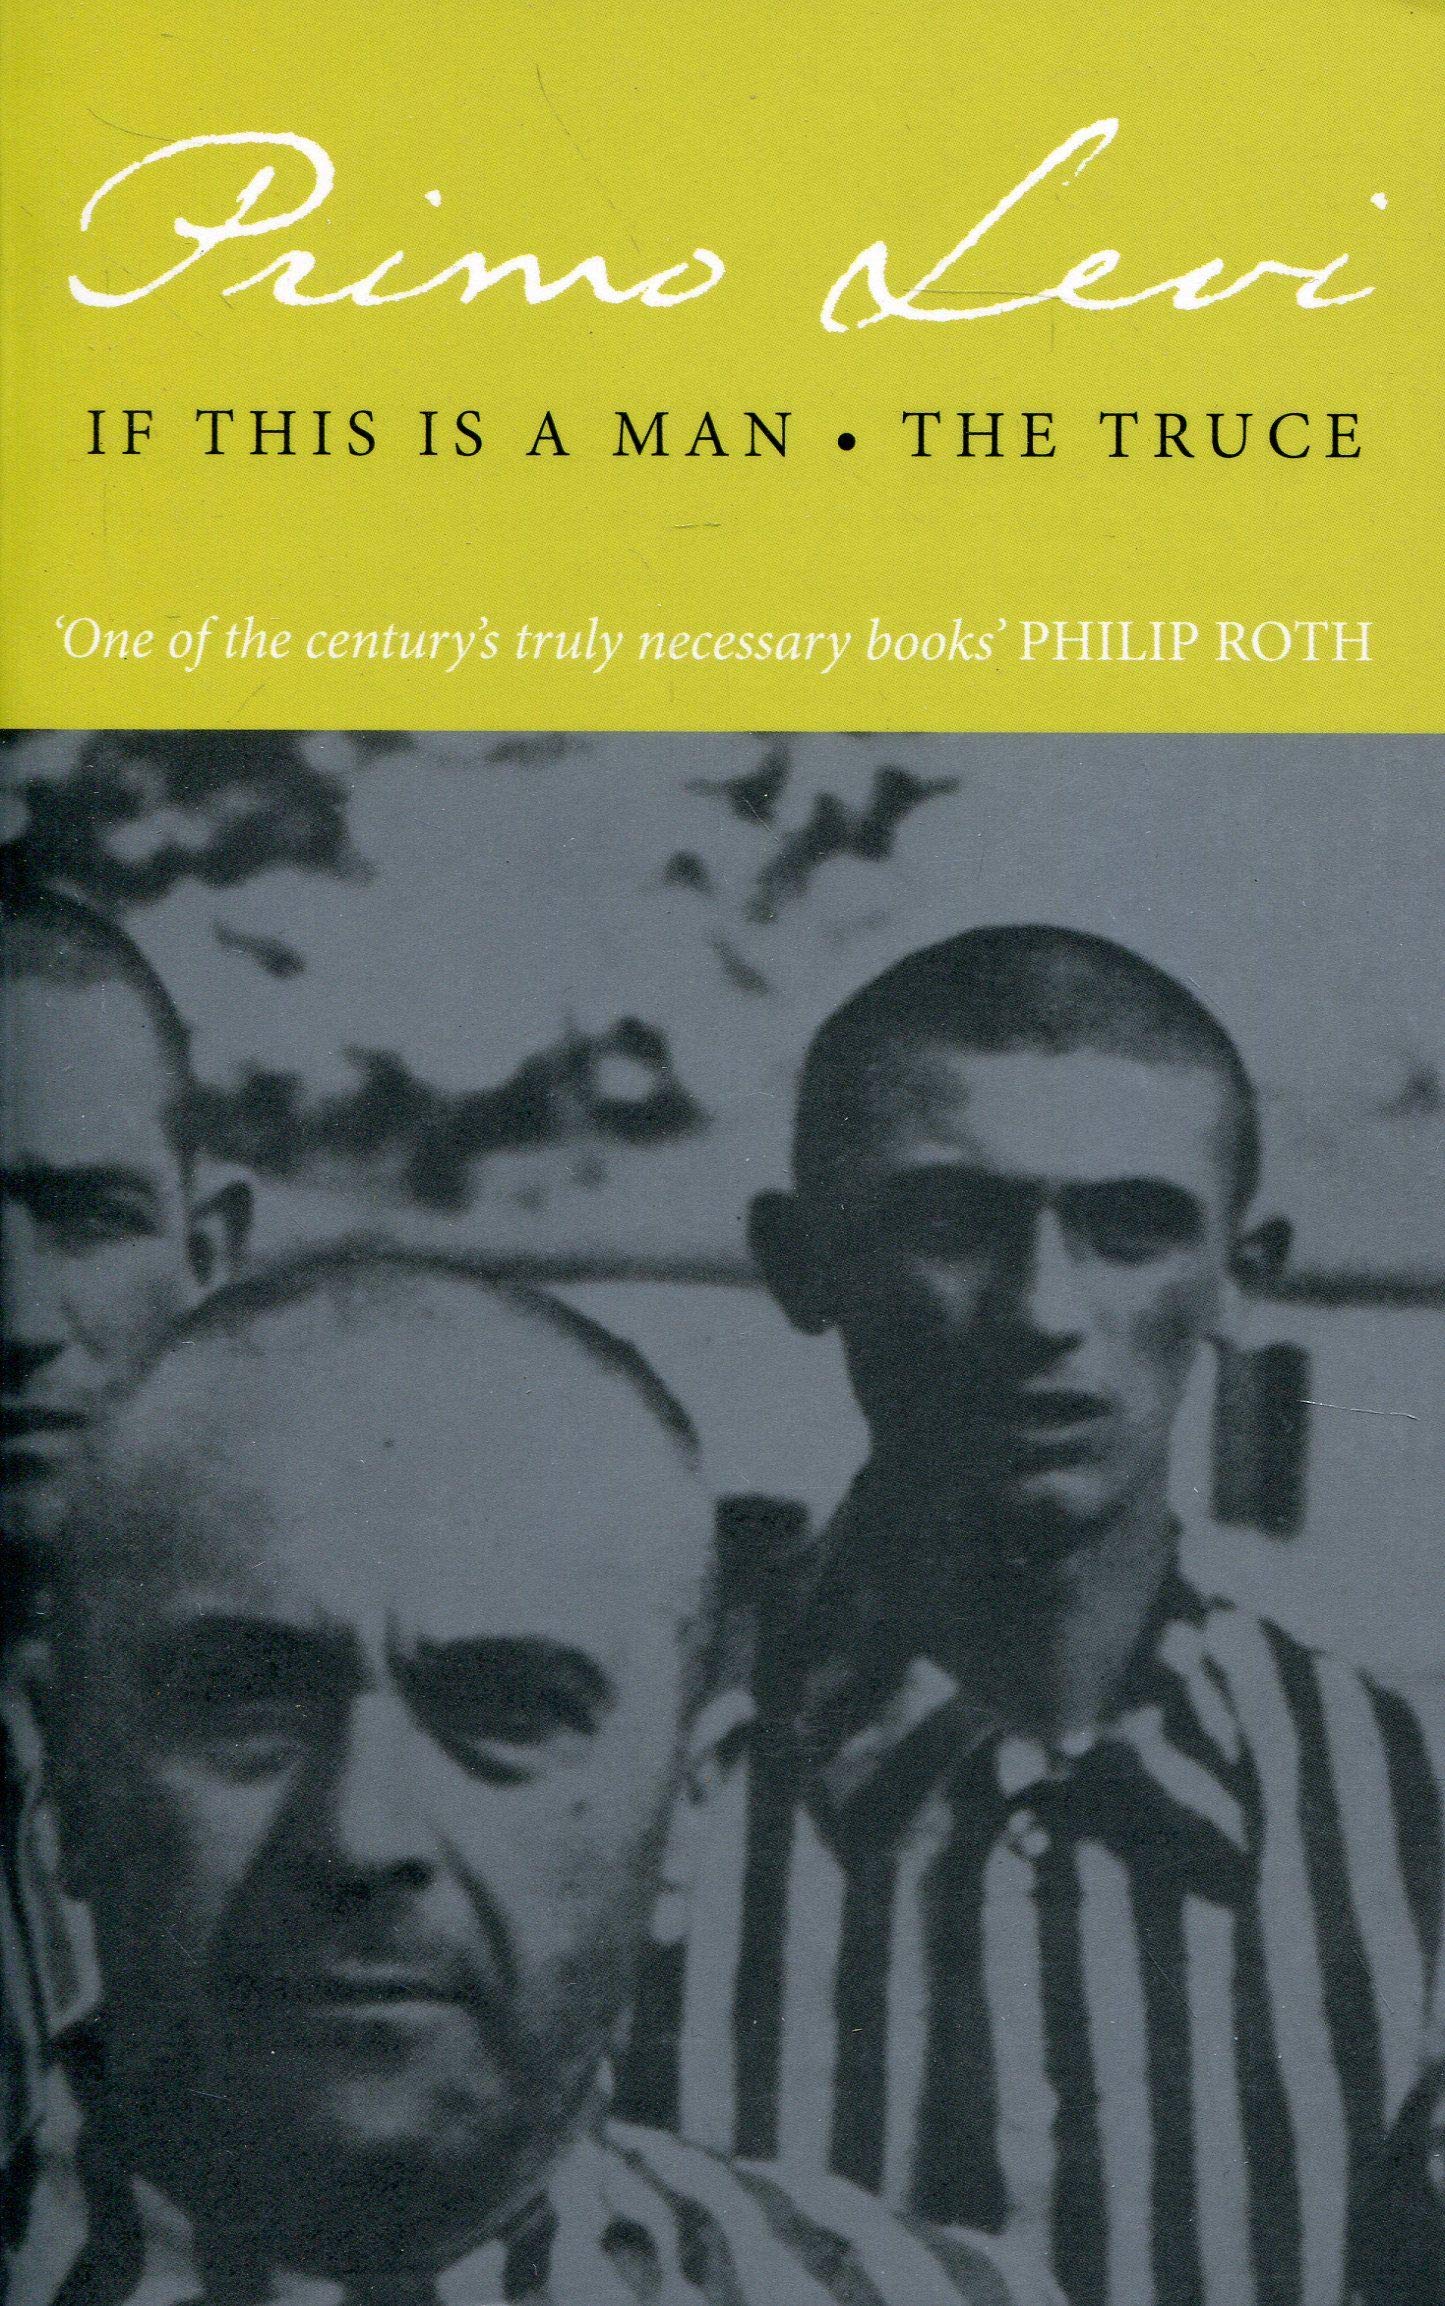 Tigge I fare Bank PDF] ACCESS' If This Is a Man ? The Truce by Primo Levi On The Internet /  Twitter